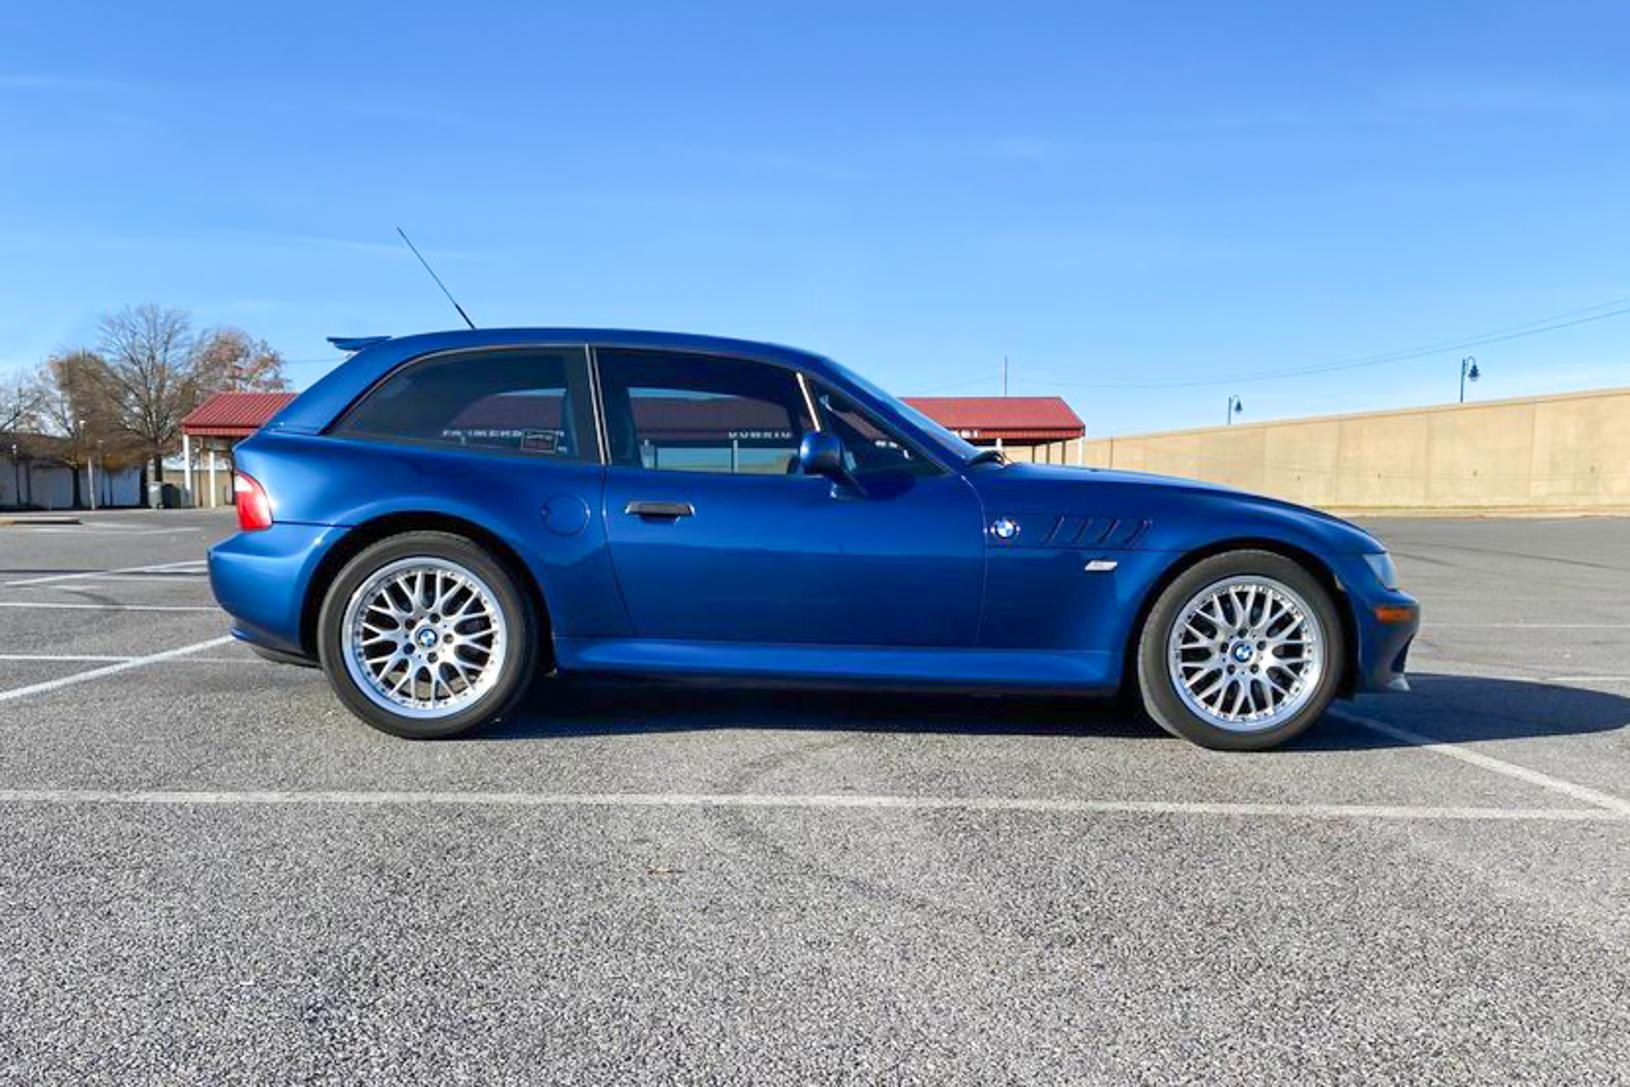 2001 BMW Z3 Coupe | Built for Backroads